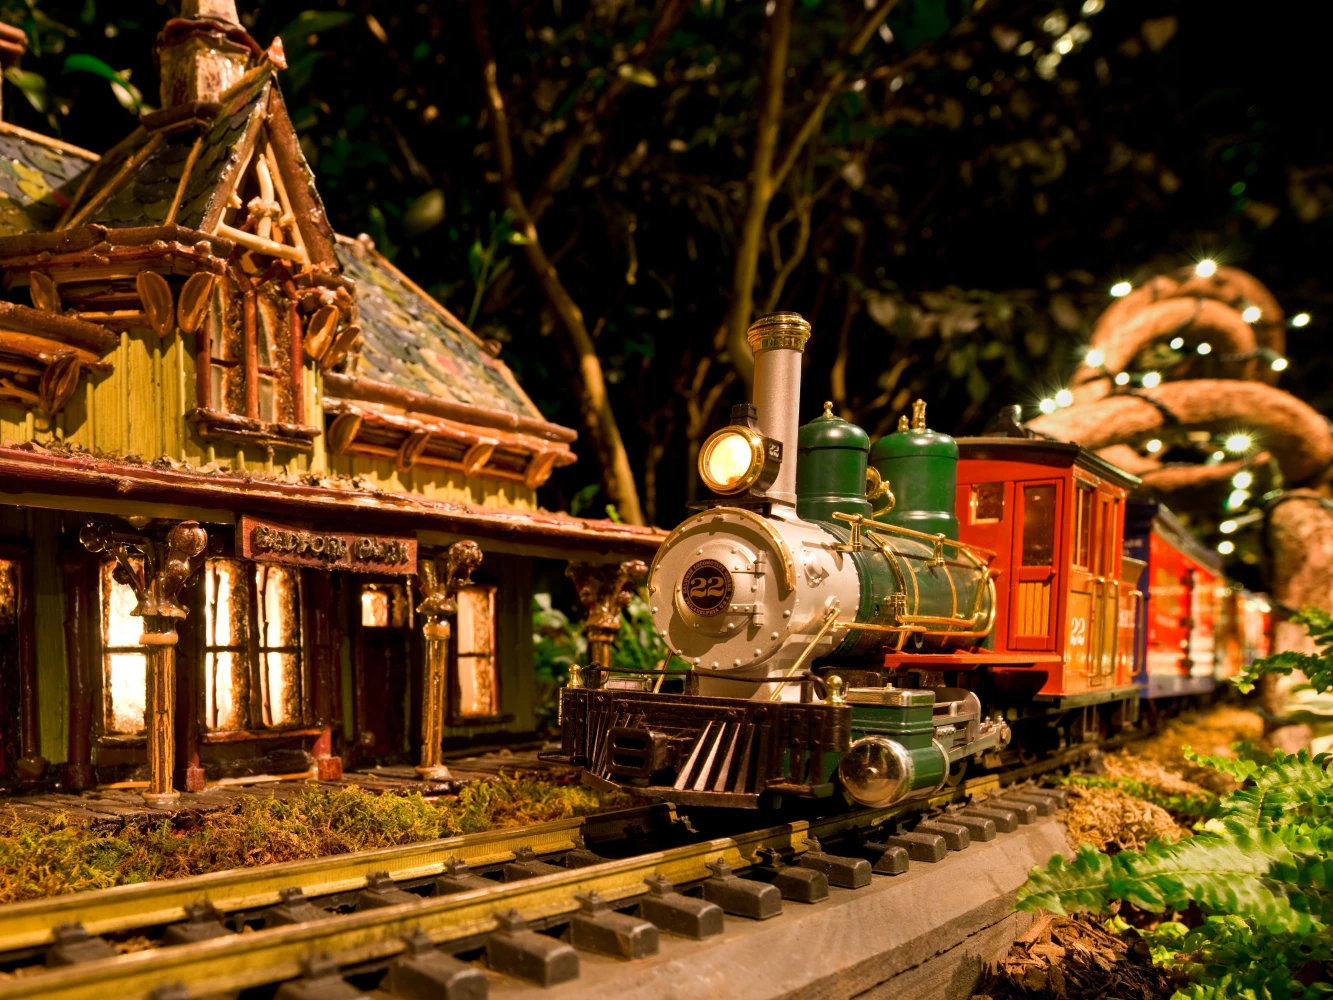 Holiday Train Show: What to expect - 5